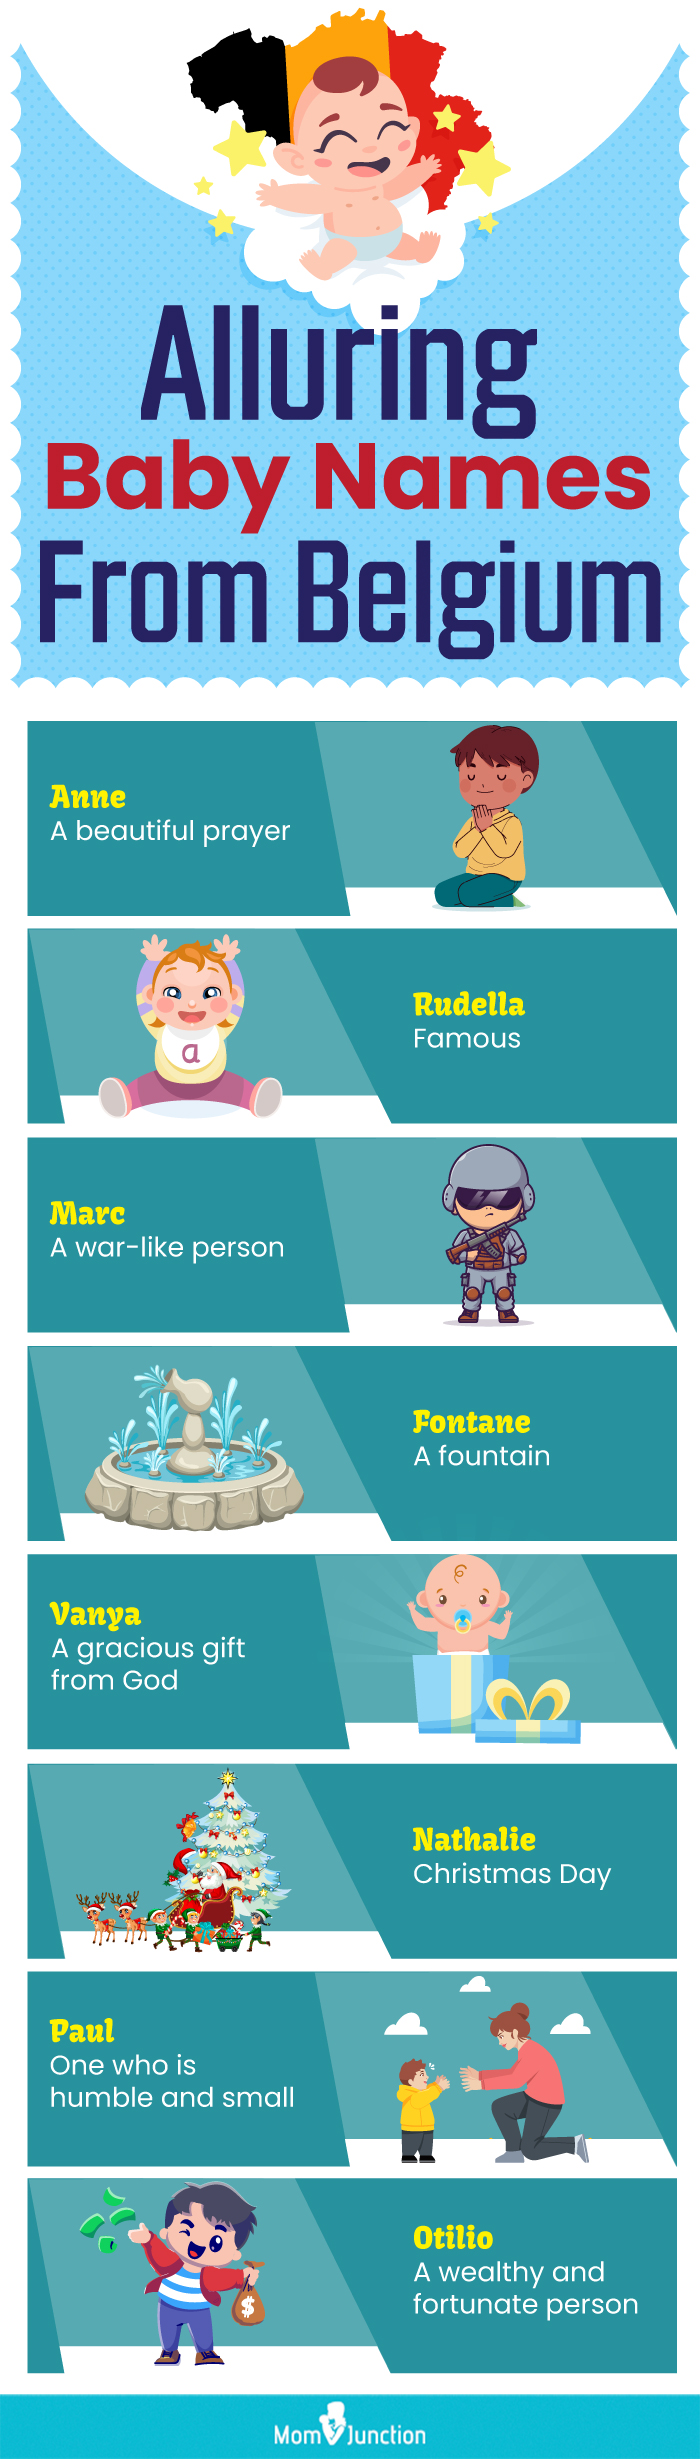 alluring baby names from belgium (infographic)